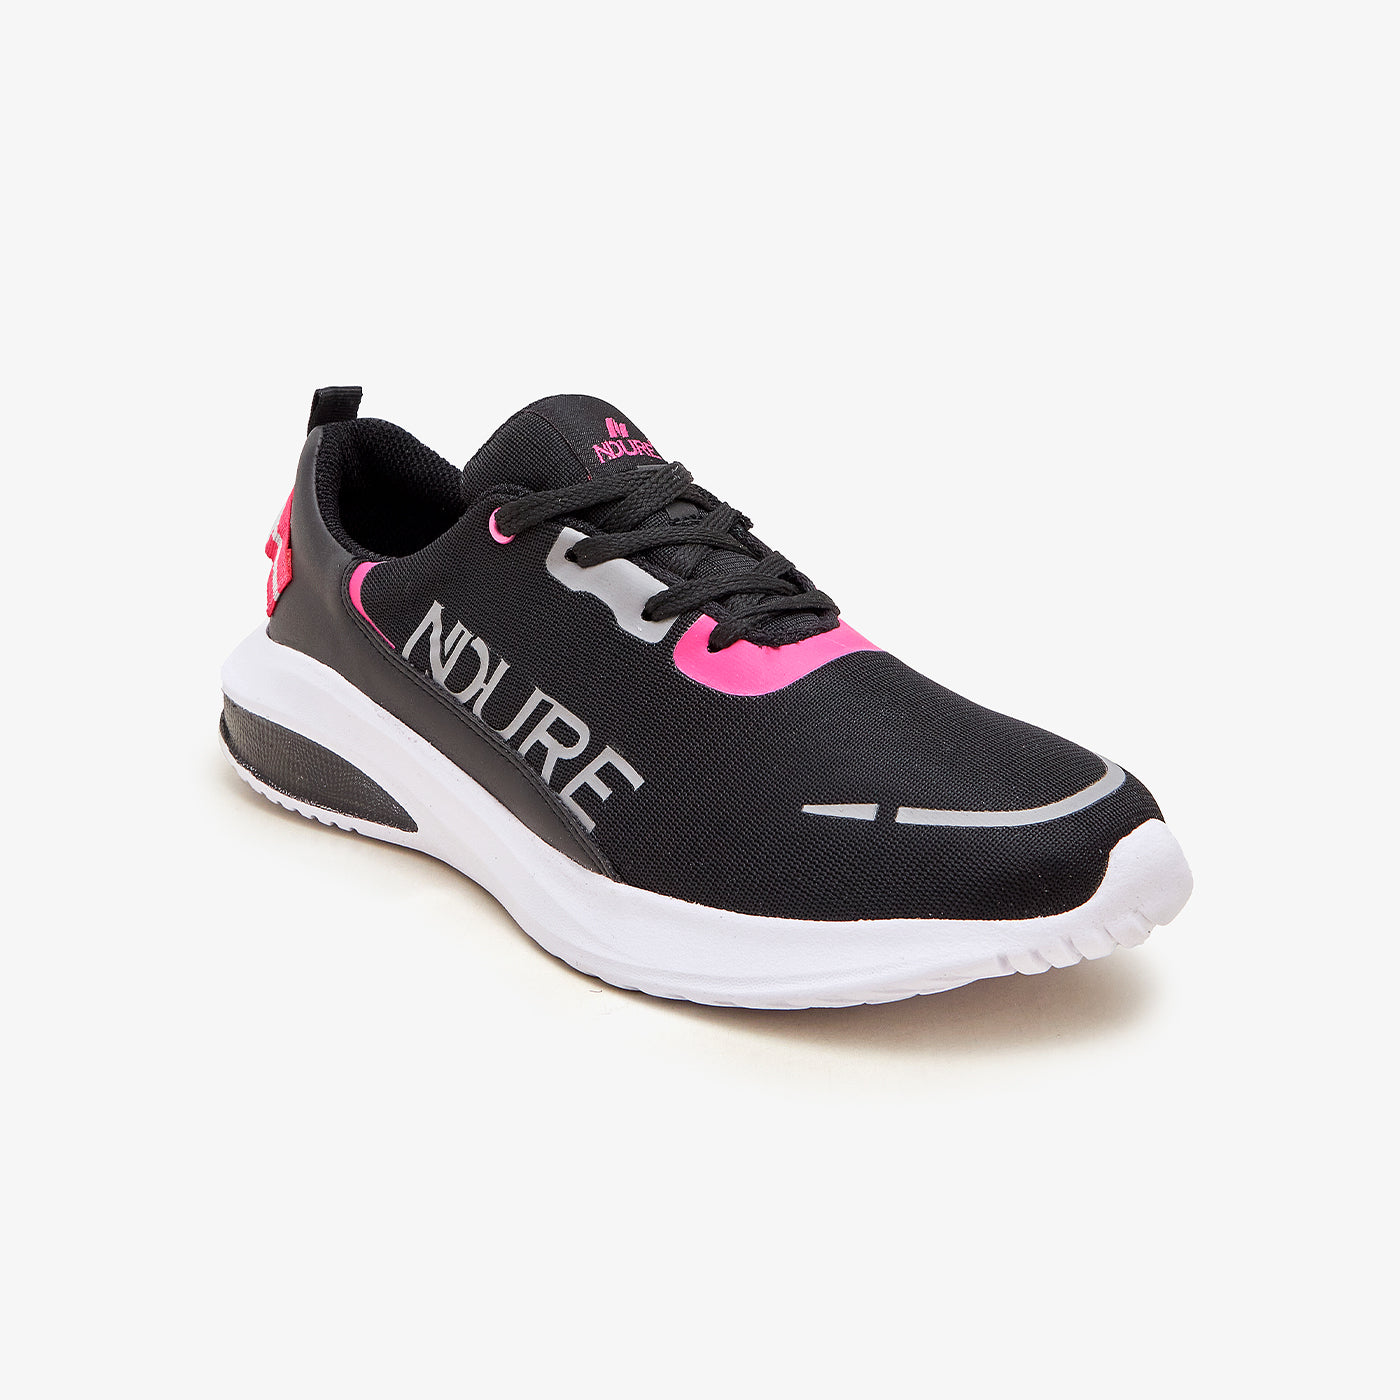 Retro Trainers for Women